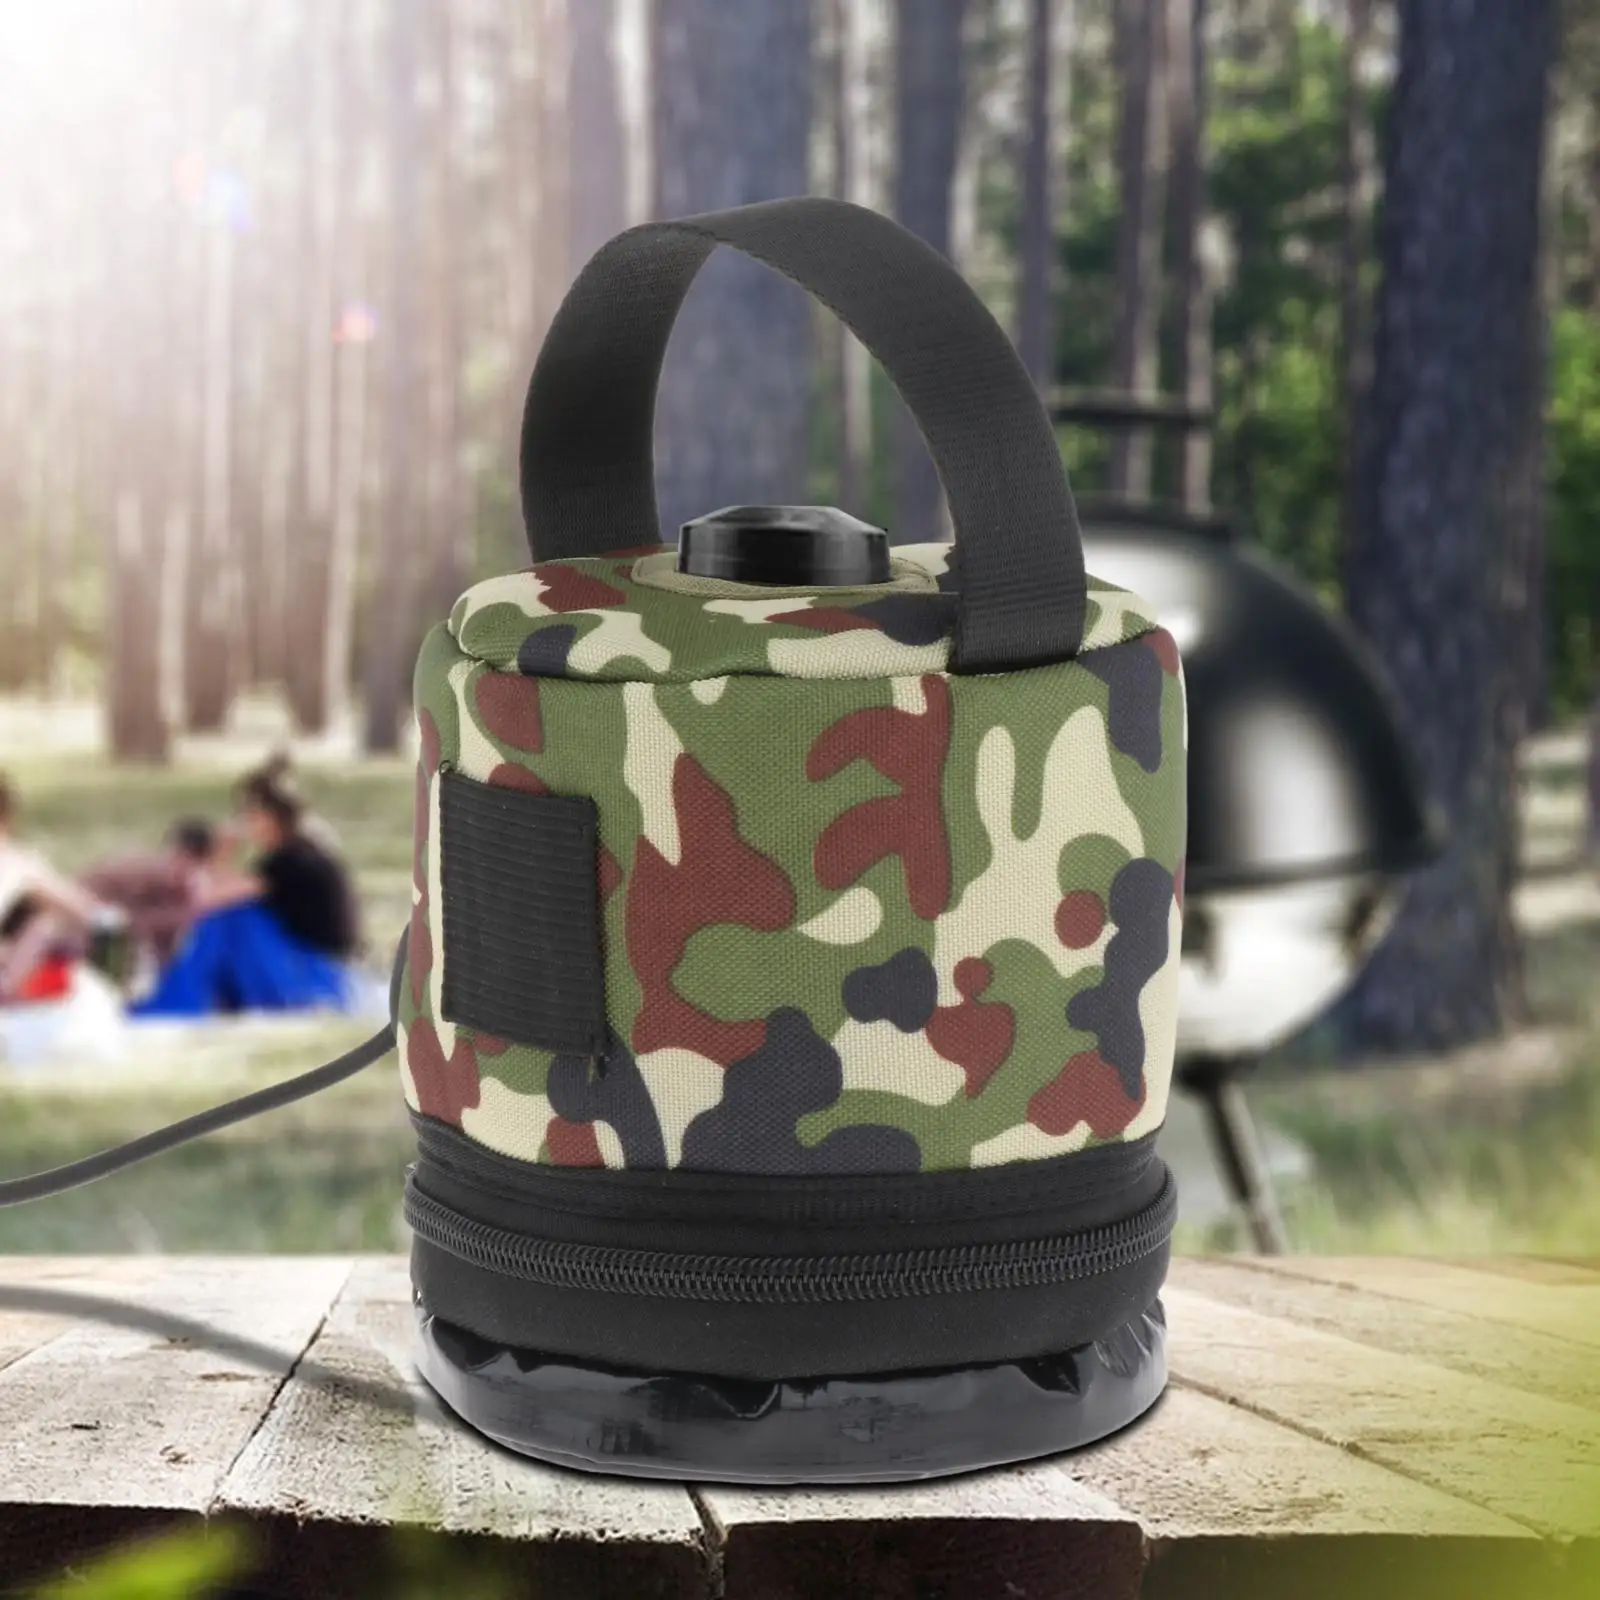 Camping Gas Canister Cover Storage Bag Fuel Cylinder Cover Fuel Canister Protective Cover for Outdoor BBQ Fishing Camping Hiking